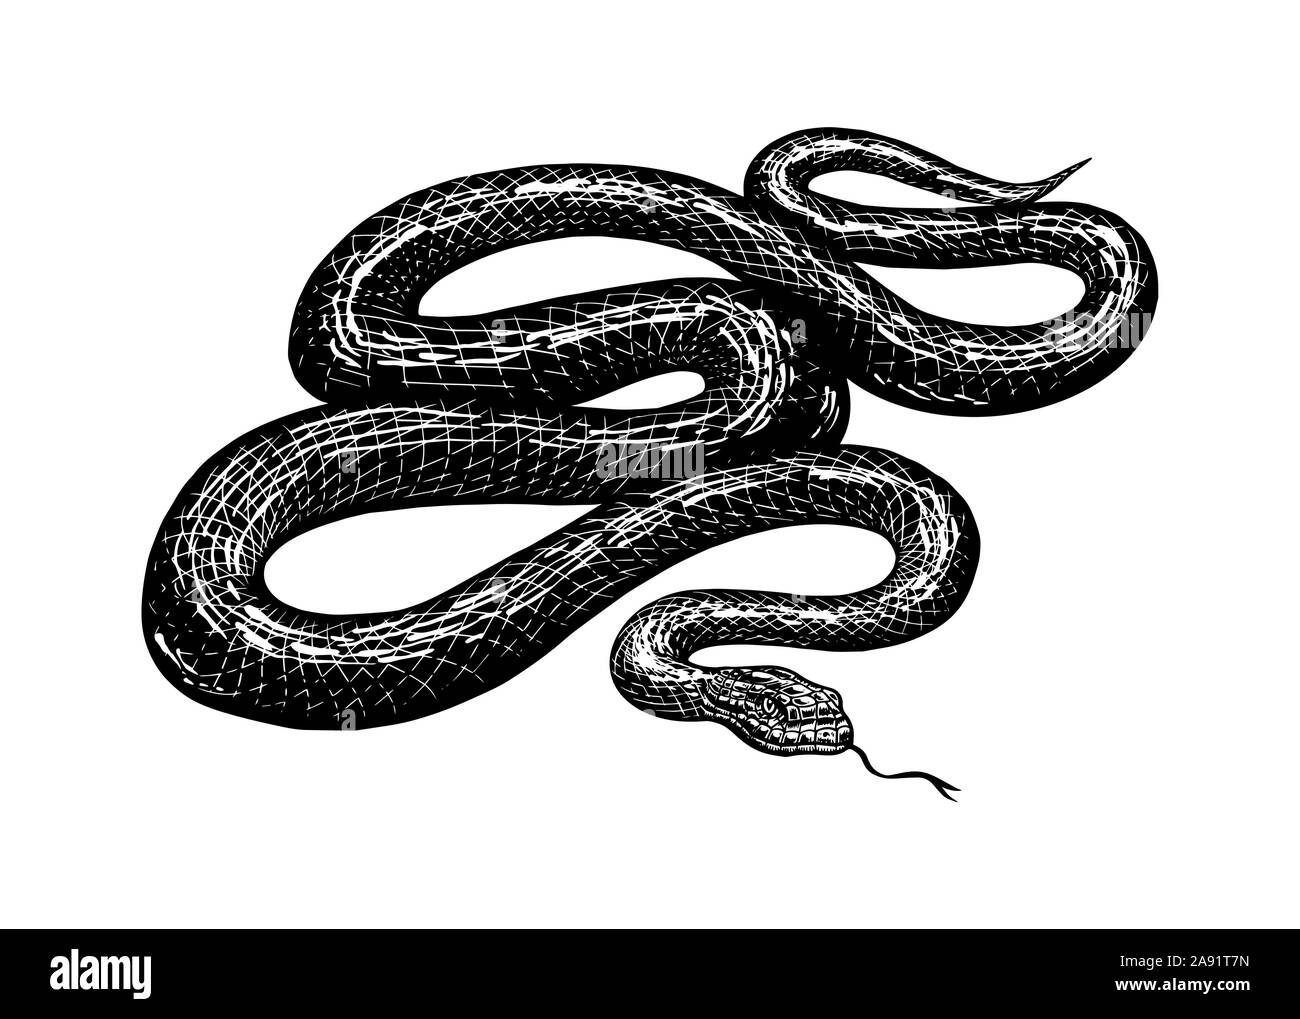 Python in Vintage style. Serpent or poisonous viper snake. Engraved hand drawn old reptile sketch for Tattoo, sticker or logo or t-shirts. Stock Vector